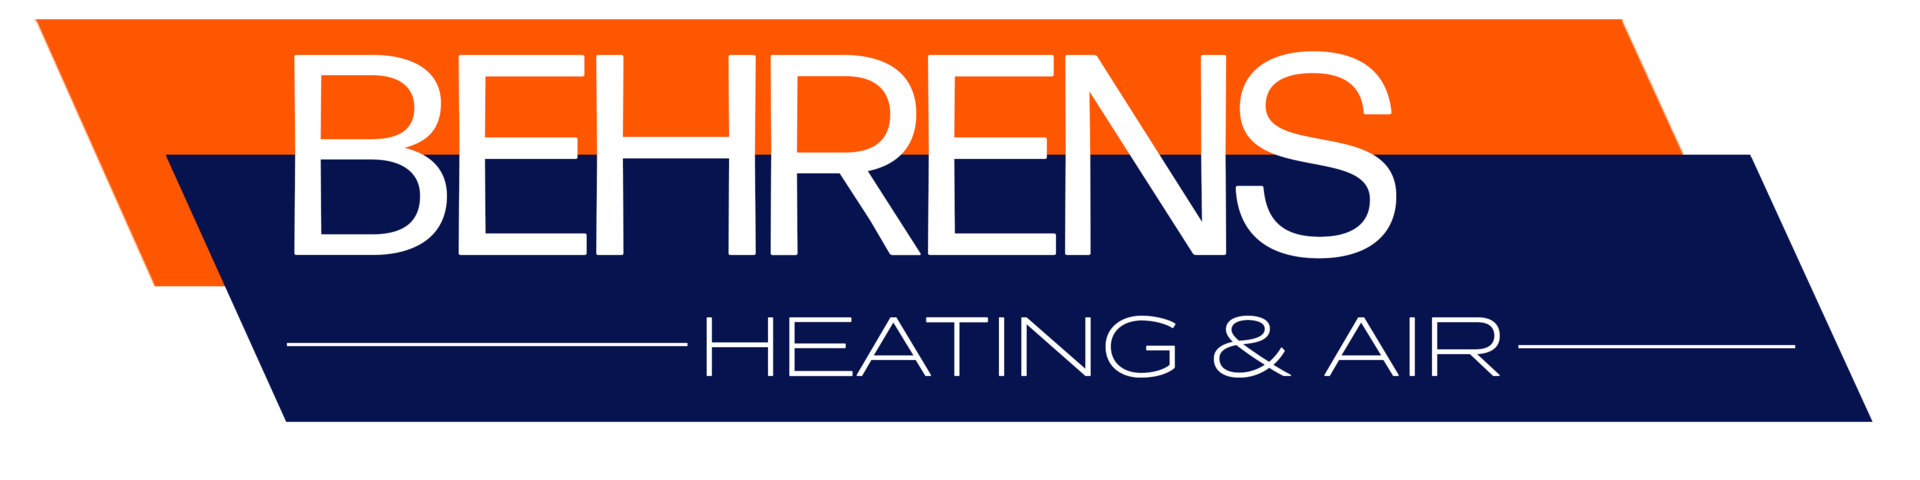 Behrens Heating & Air Conditioning Inc